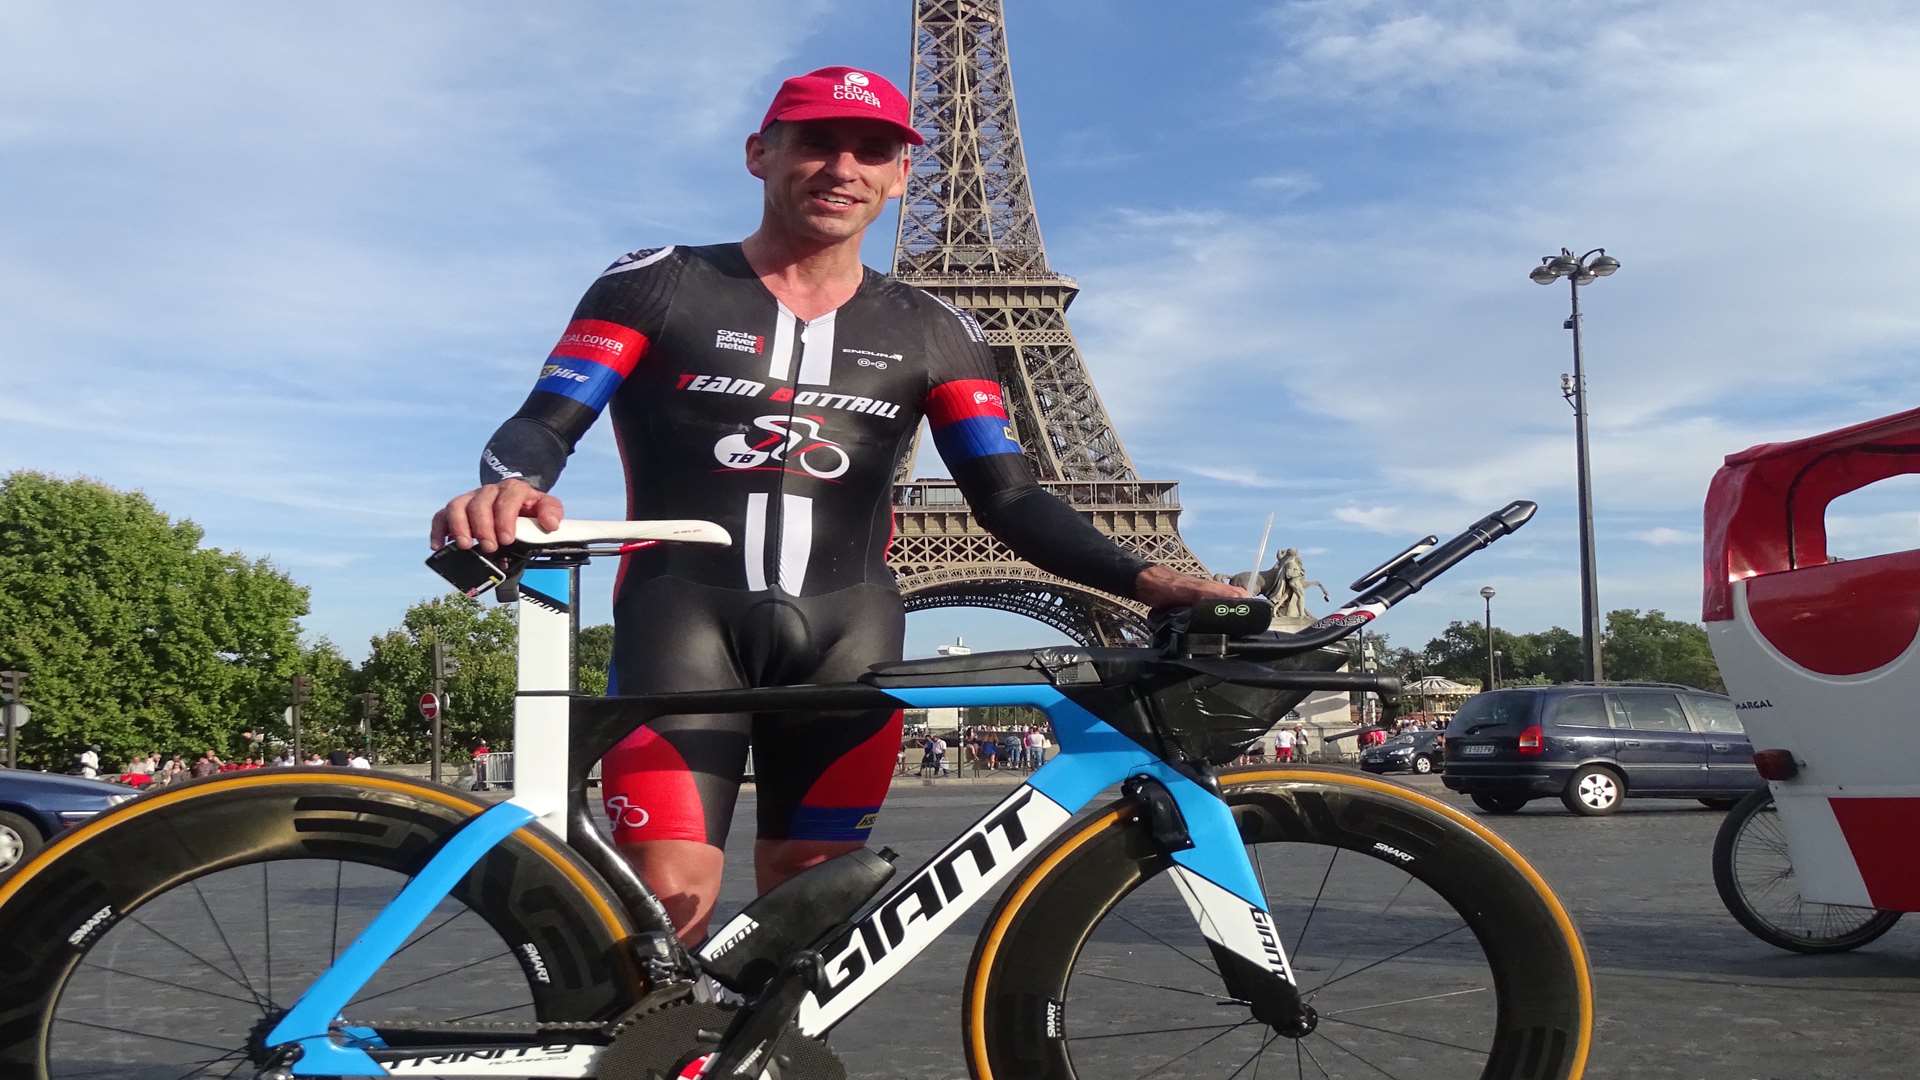 Jonathan Parker in Paris after riding from London to France